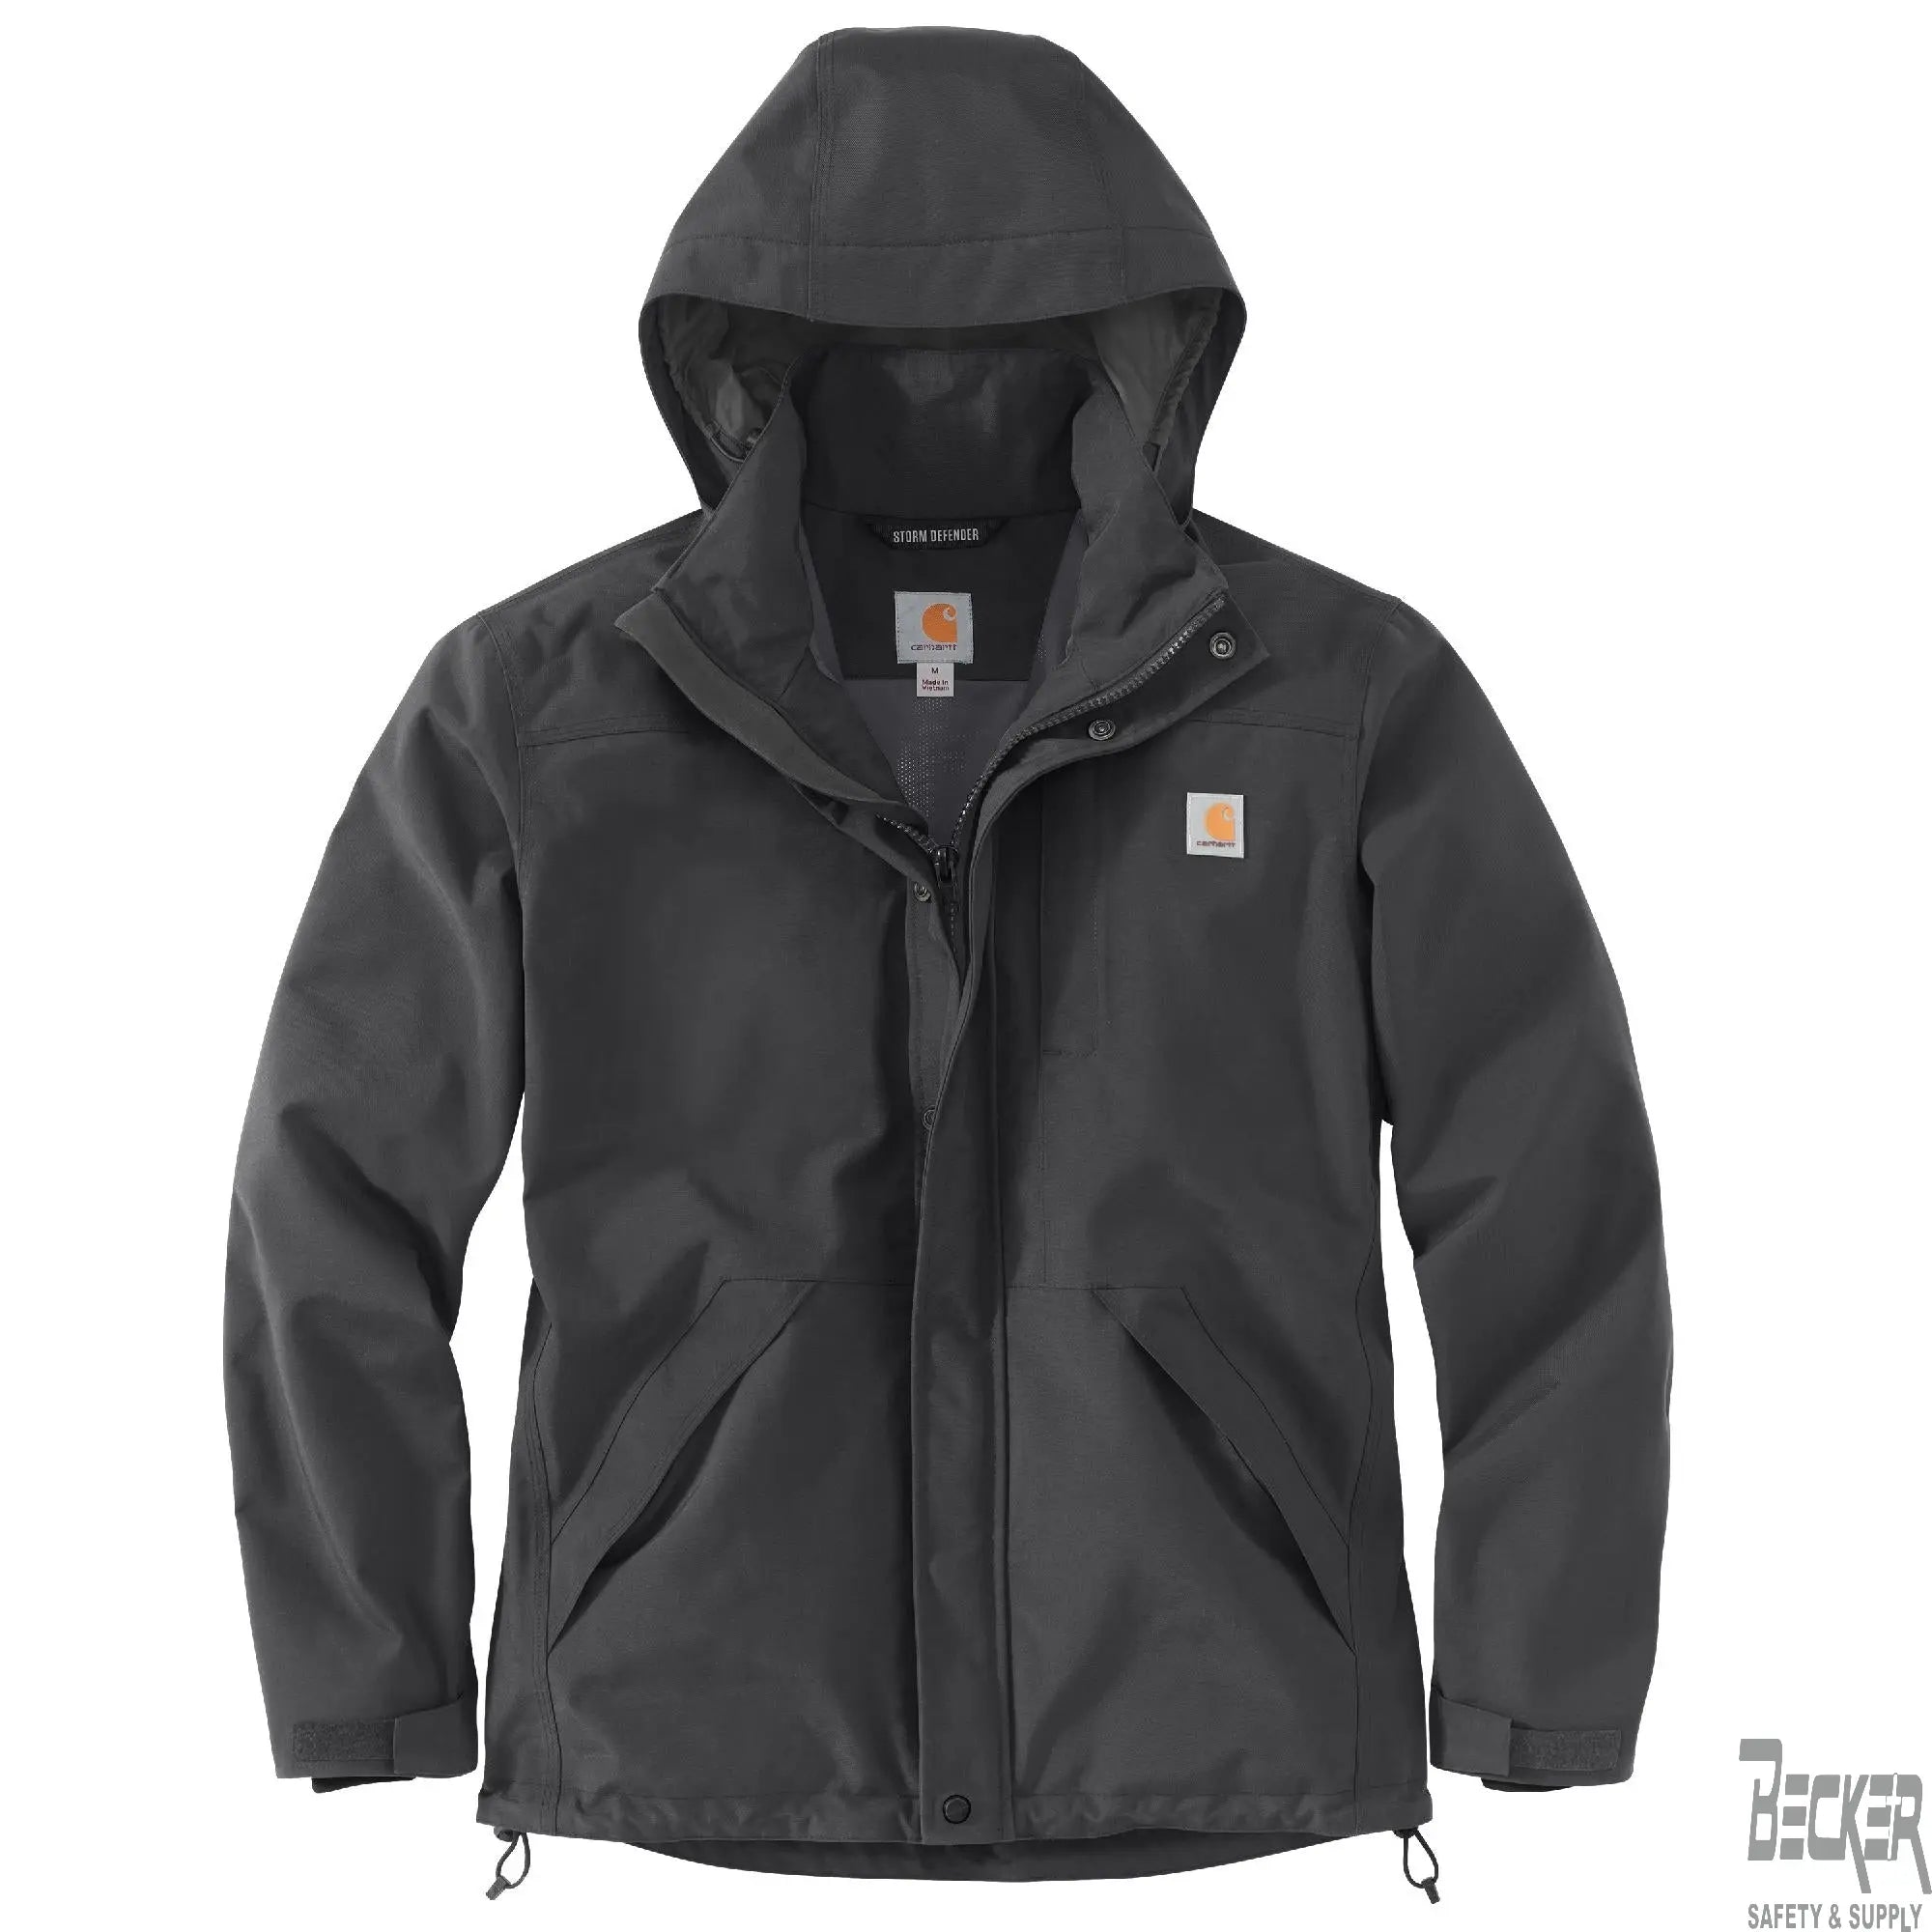 CARHARTT - Storm Defender Loose Fit Heavyweight Jacket - Becker Safety and Supply